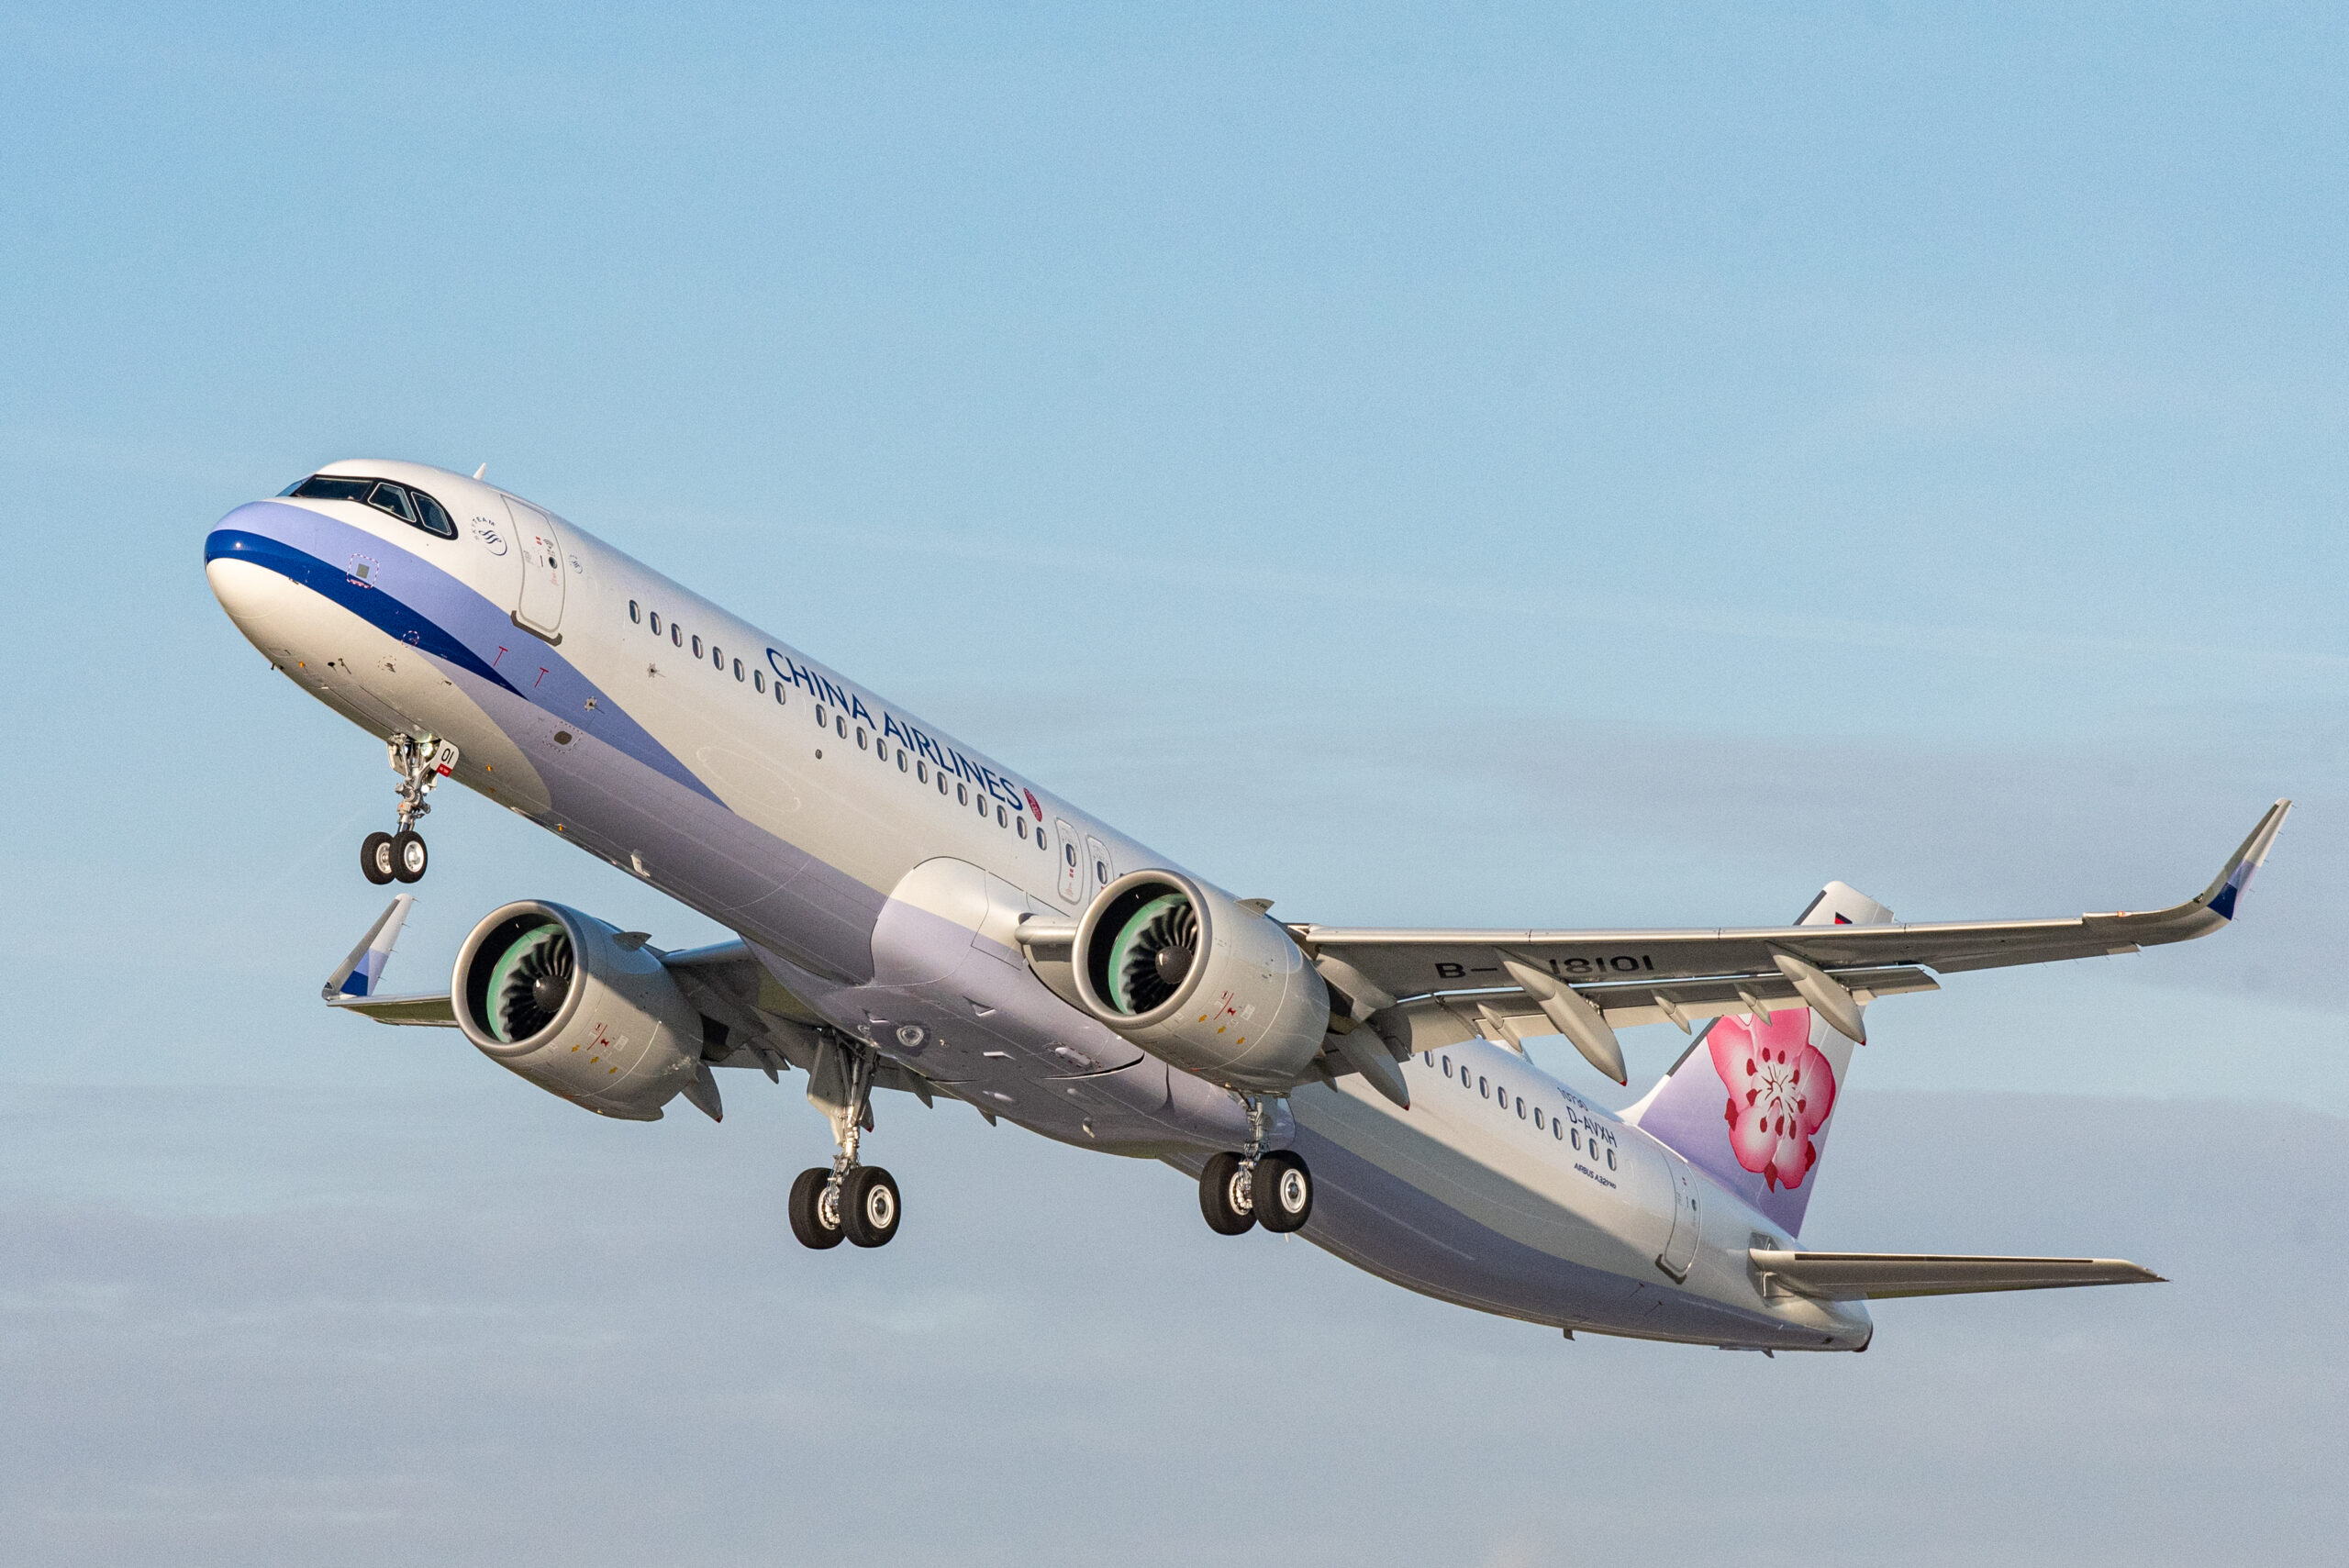 Business travellers in southern Taiwan will soon be able to enjoy the convenience of the new China Airlines Kaohsiung - Seoul (Gimpo) route with three weekly return flights.